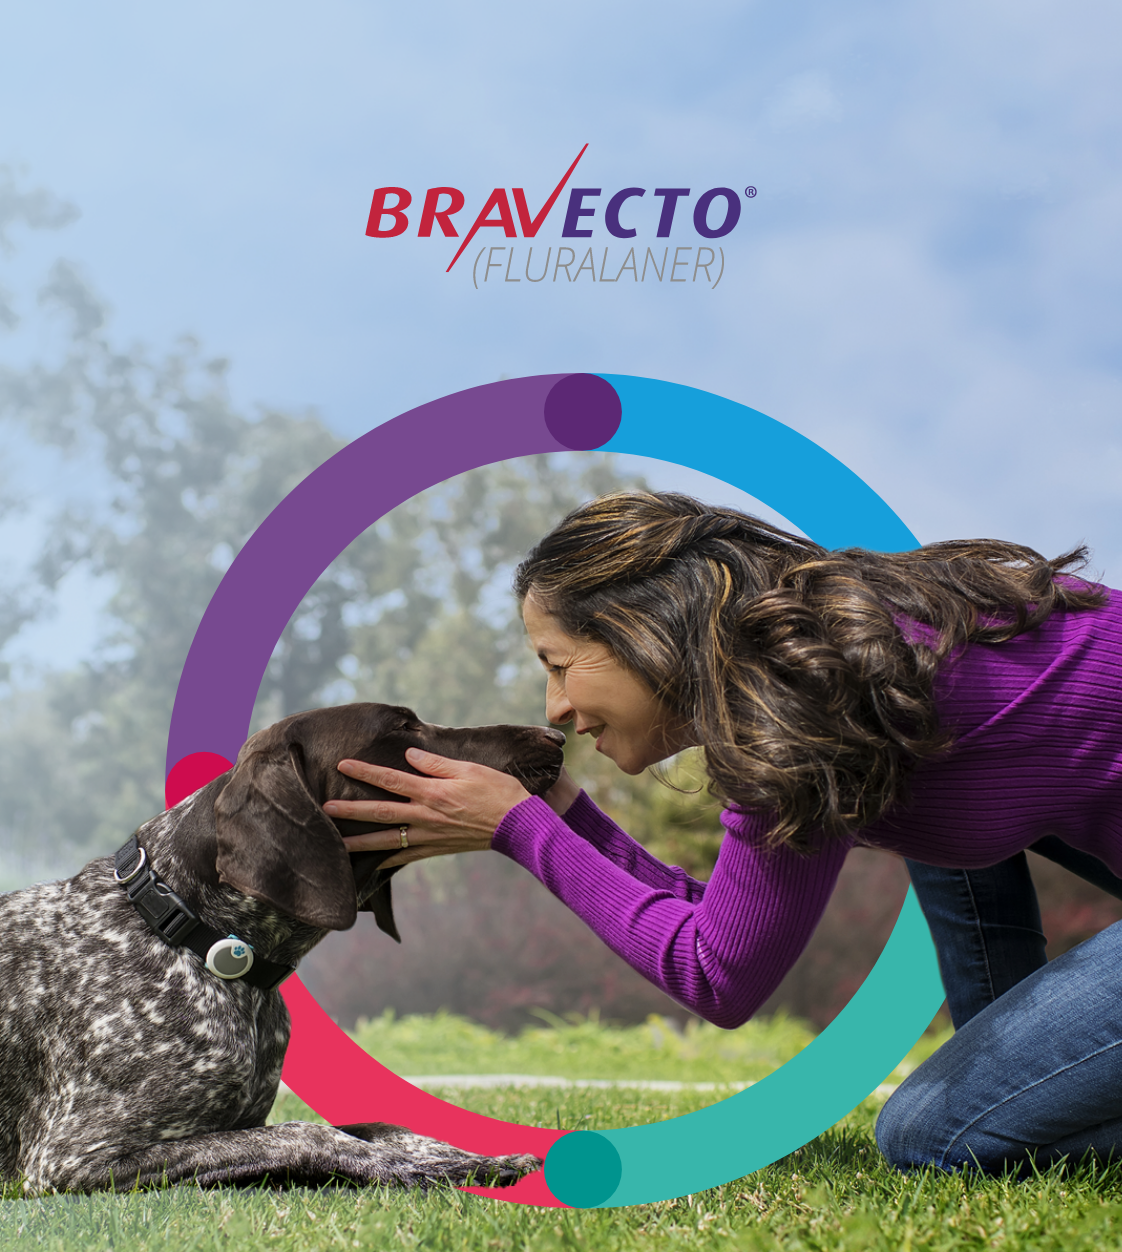 Bravecto chew cover with dog and dog owner